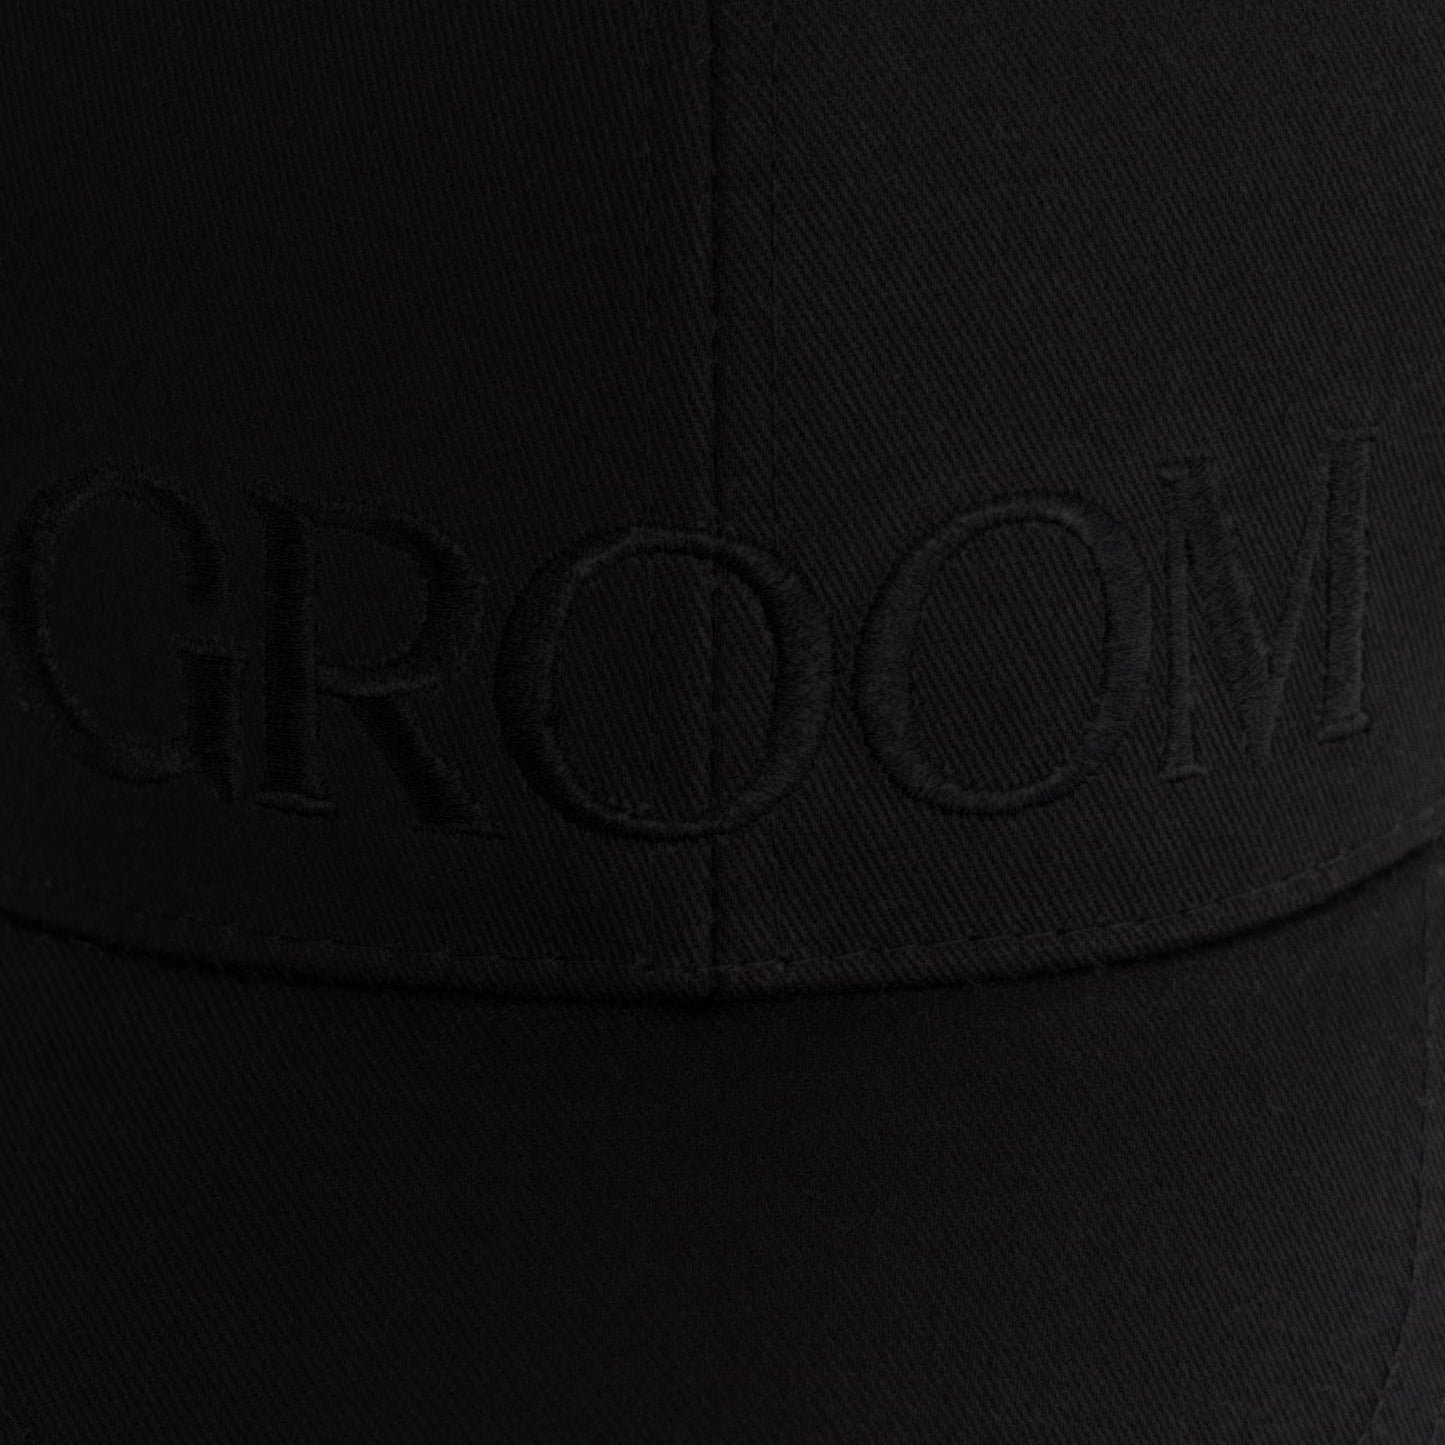 Black-on-black embroidered GROOM baseball hat comes with an adjustable brass buckle. Made of 100% cotton twill.